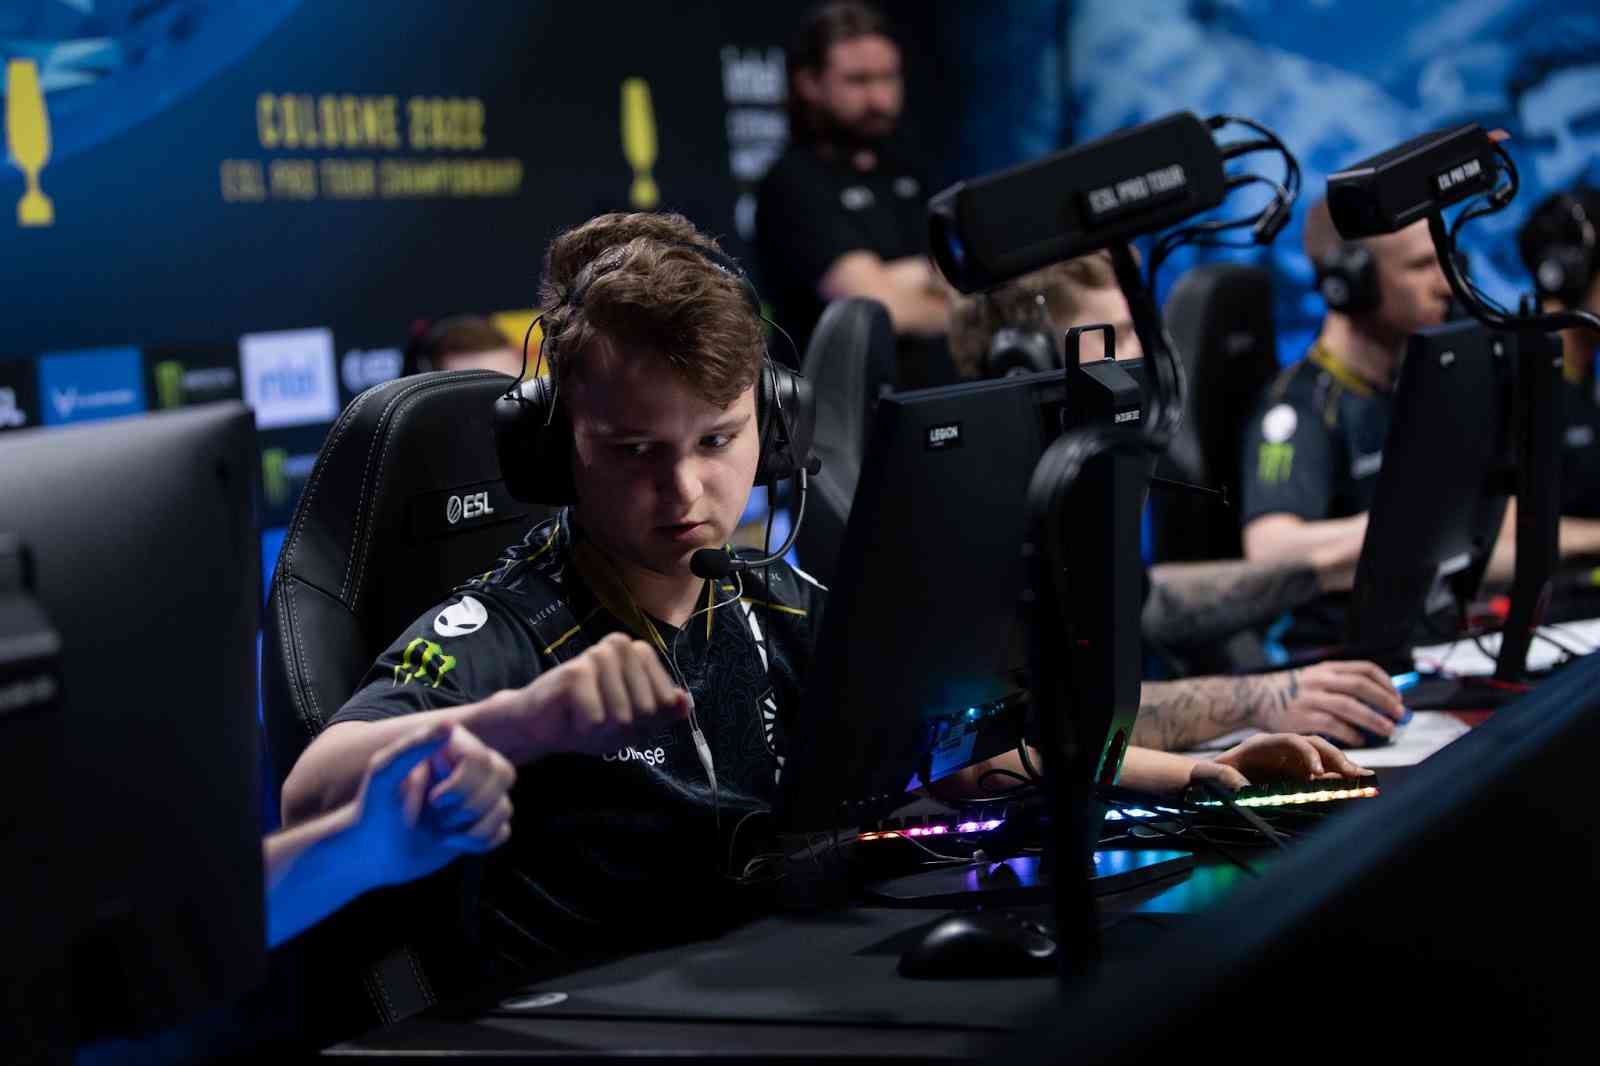 Jonathan "EliGE" Jablonowski fist bumps a team mate off camera ahead of a match of CS:GO during IEM Cologne 2022